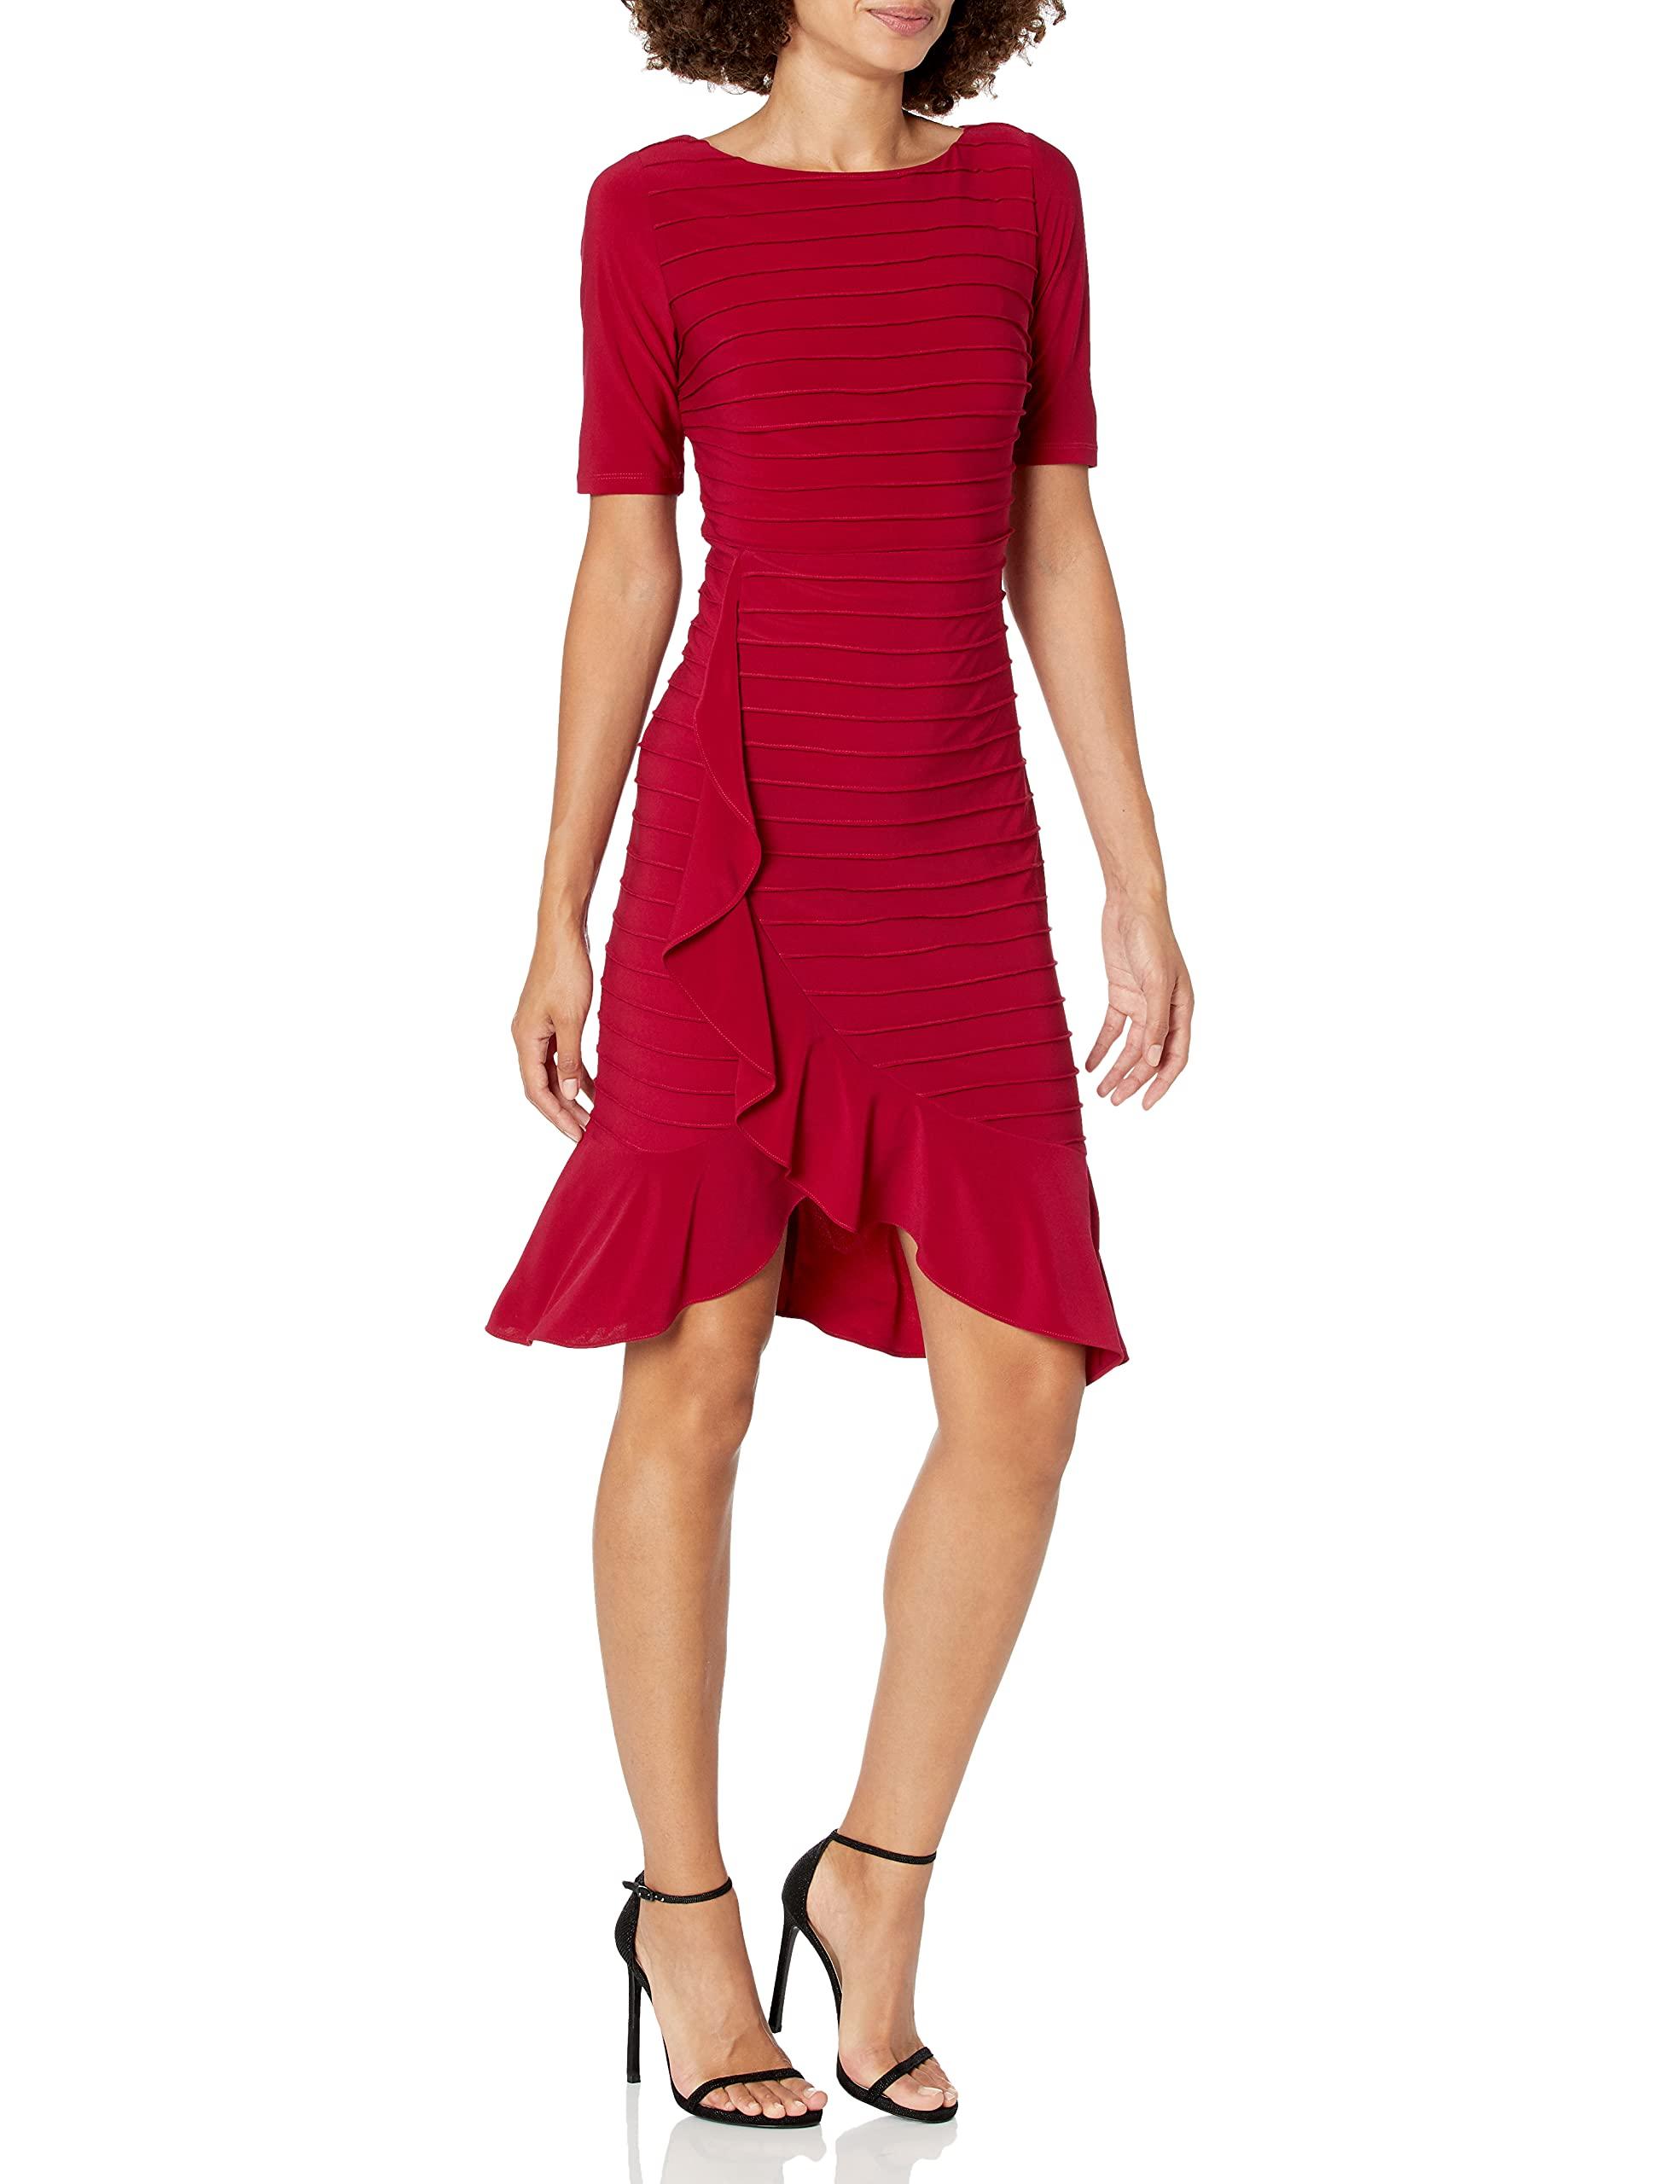 Adrianna Papell Pintucked Ruffle Dress in Red | Lyst